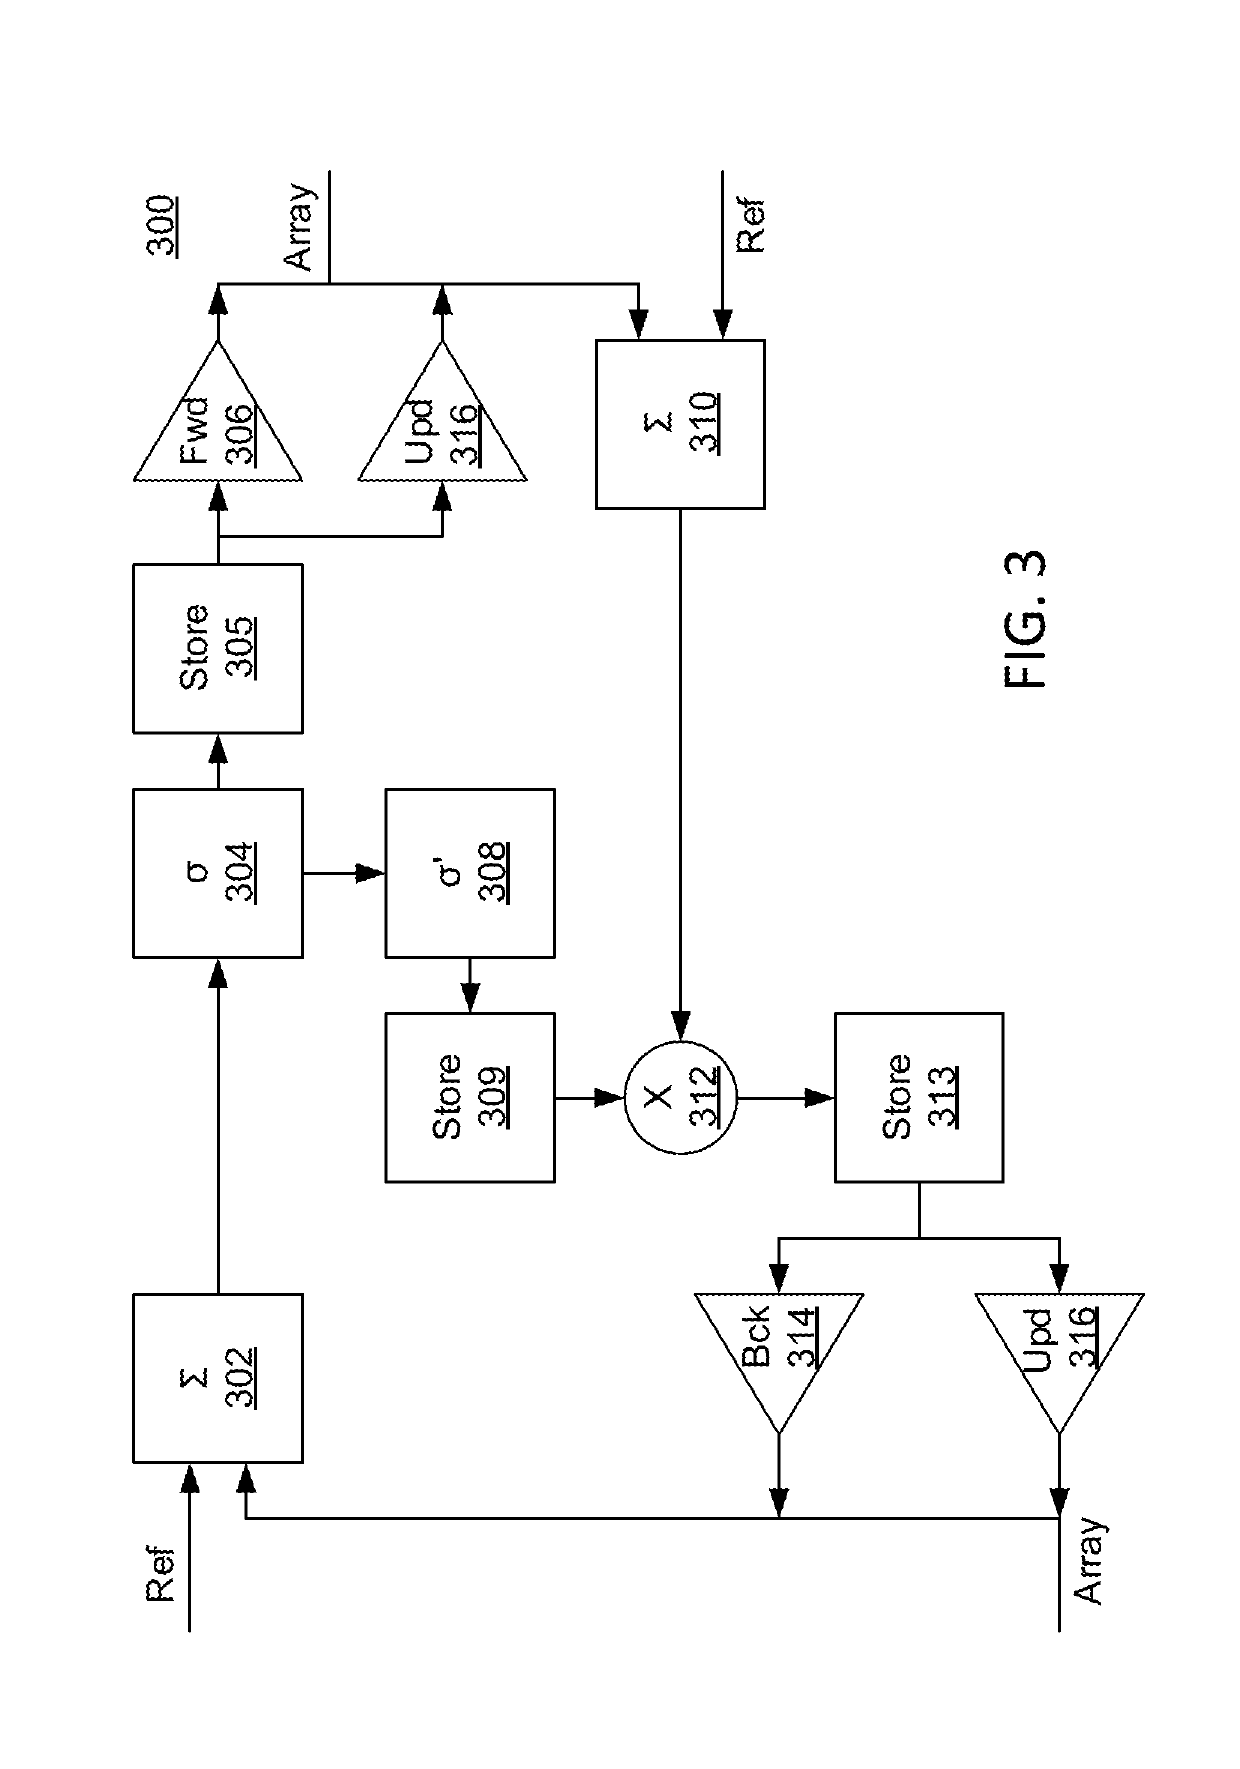 Density estimation network for unsupervised anomaly detection